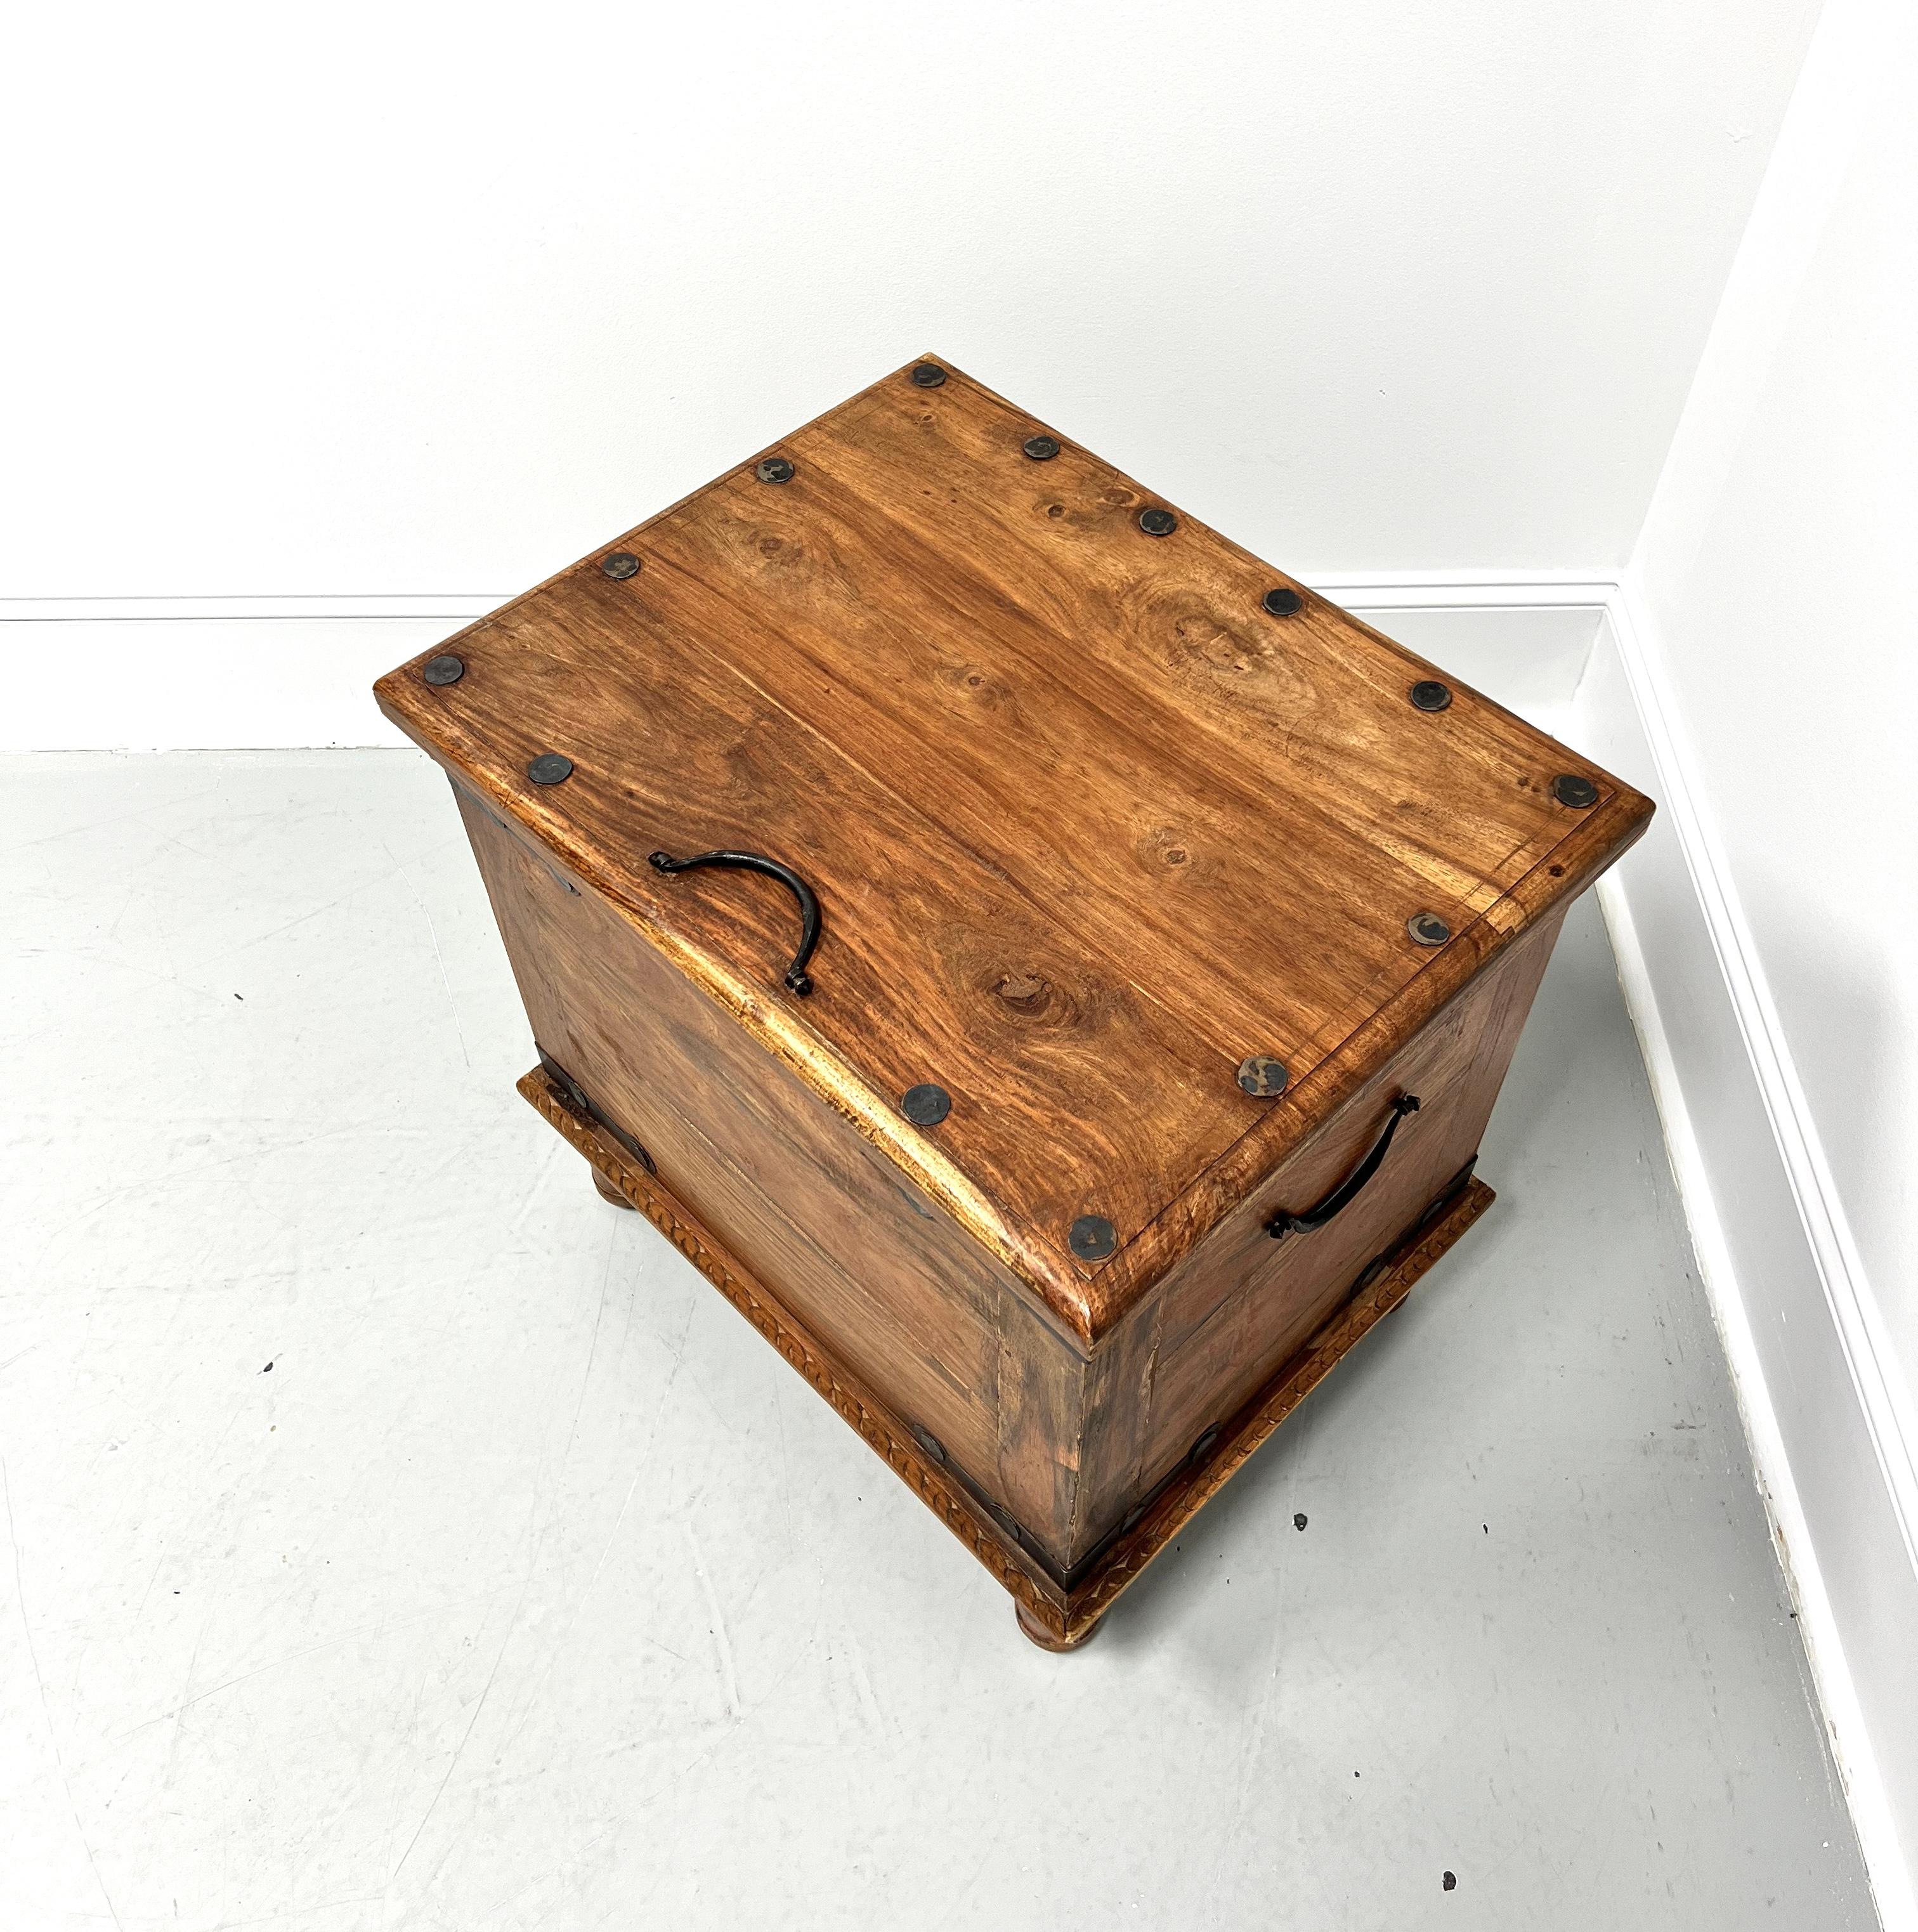 Vintage 20th Century Wood & Metal Rustic Storage Trunk Accent Table In Good Condition For Sale In Charlotte, NC